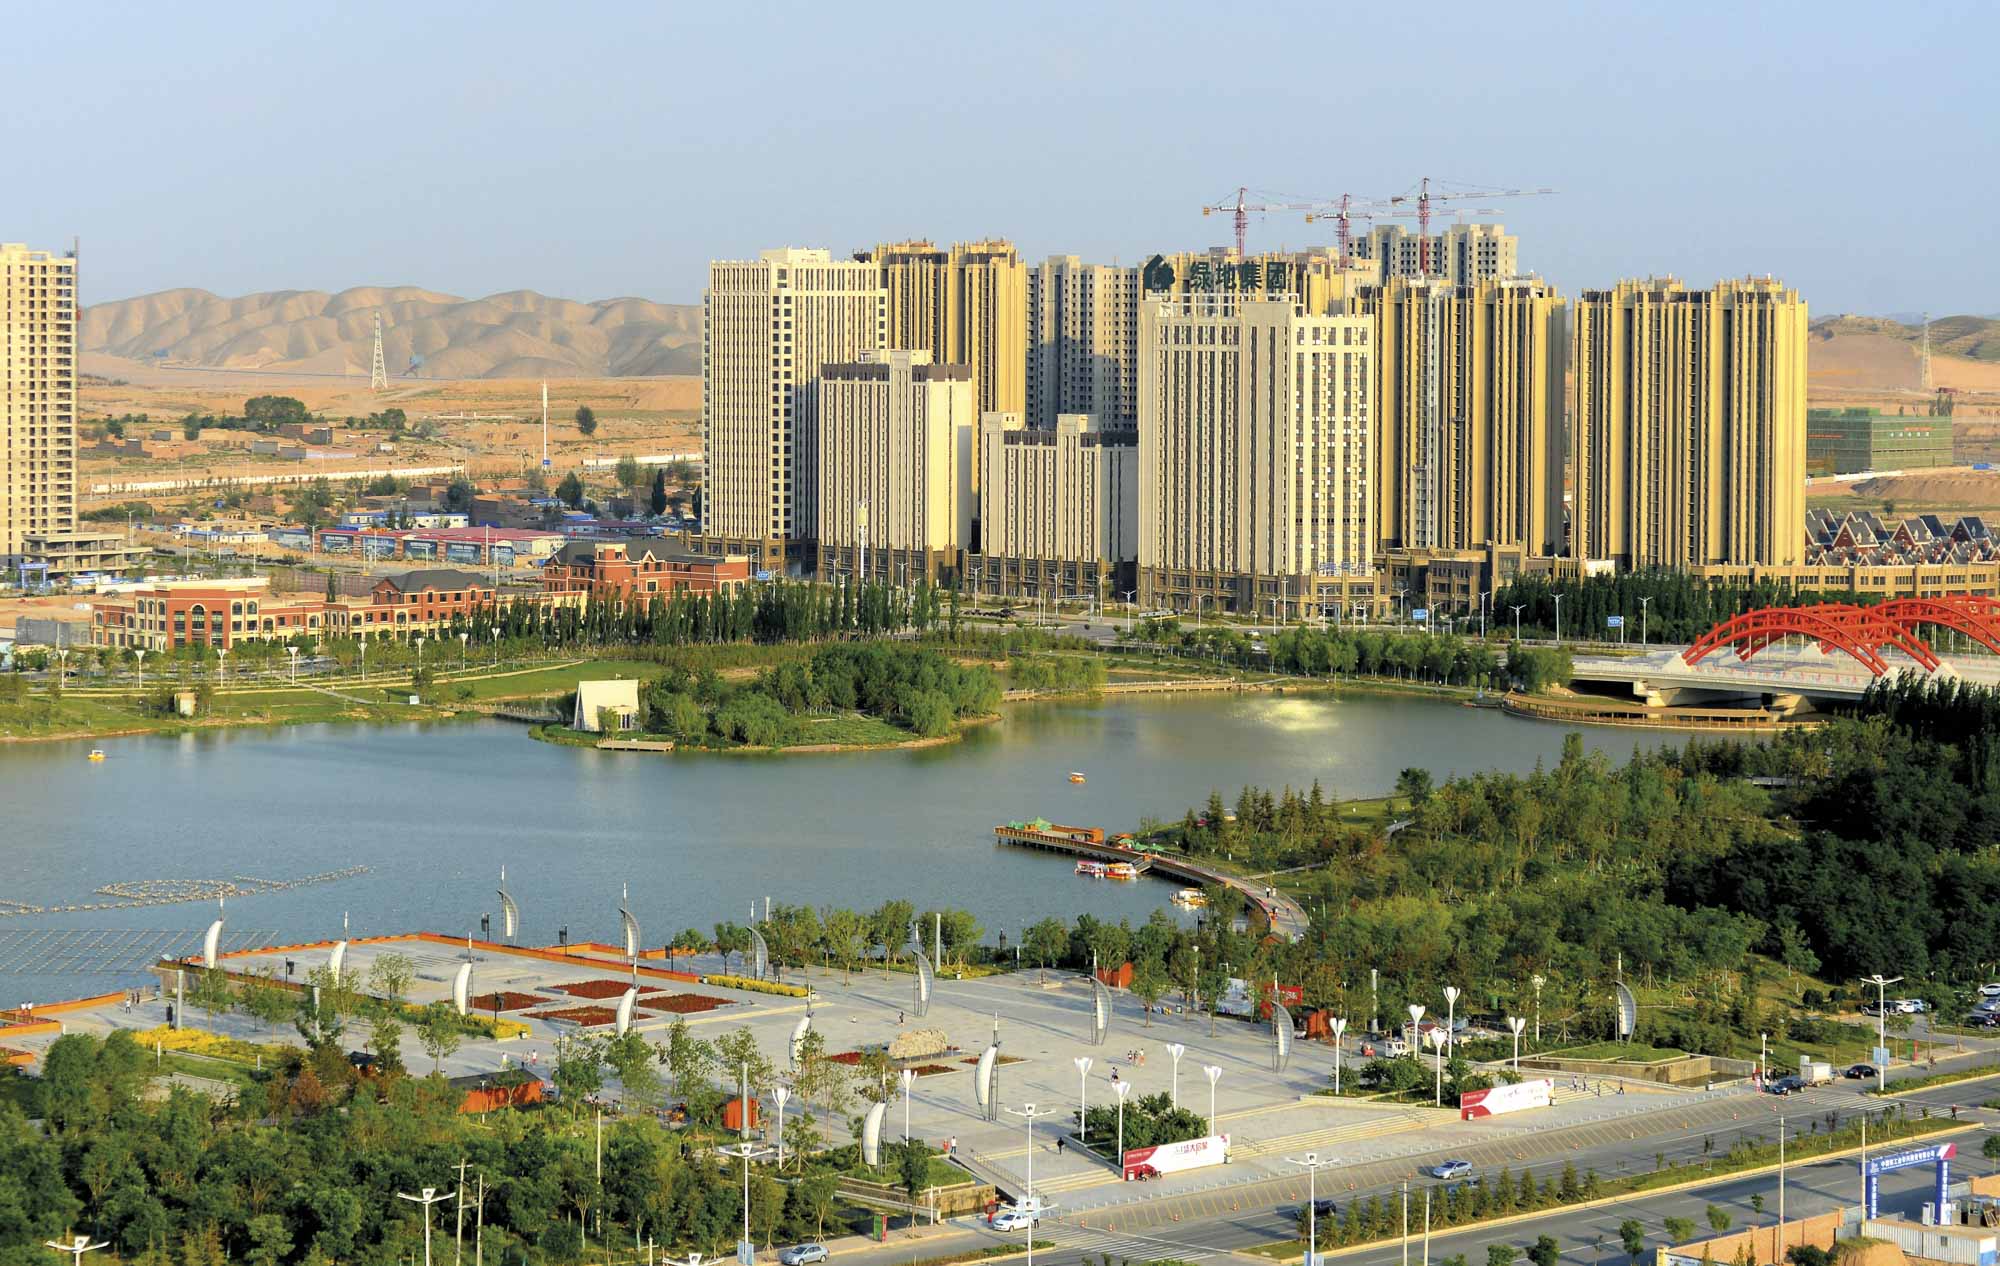 lanzhou-new-district-gansu-province-carry-out-a-special-check-of-cryptocurrency-mining